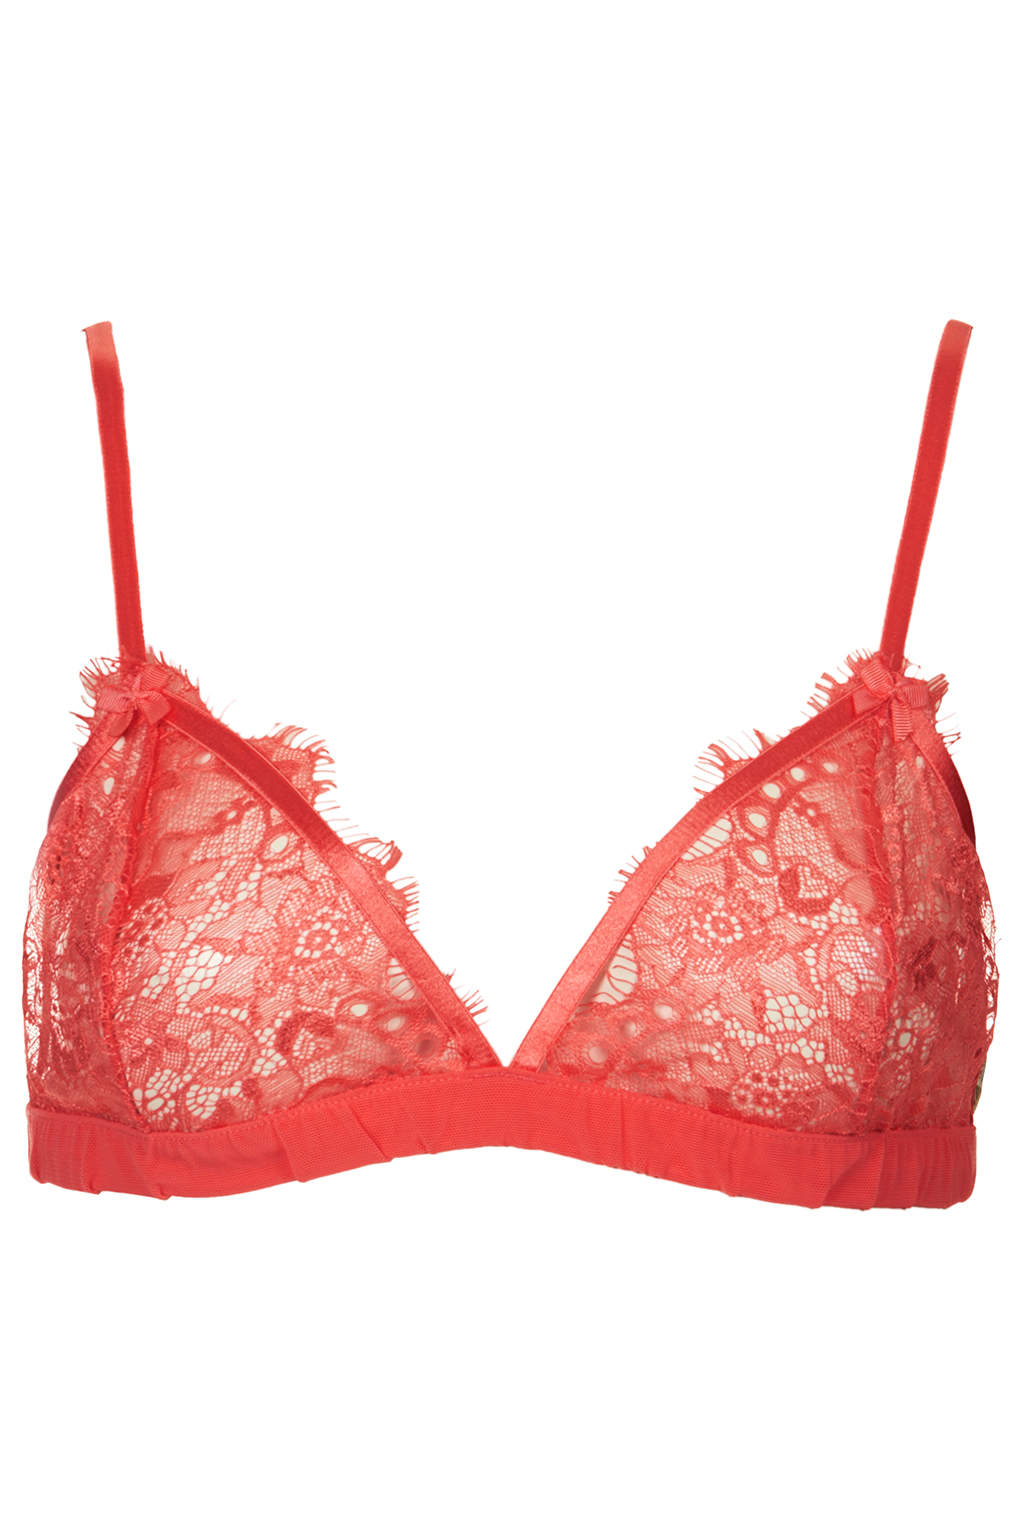 Topshop Triangle Cup Bra in Red (CORAL) | Lyst